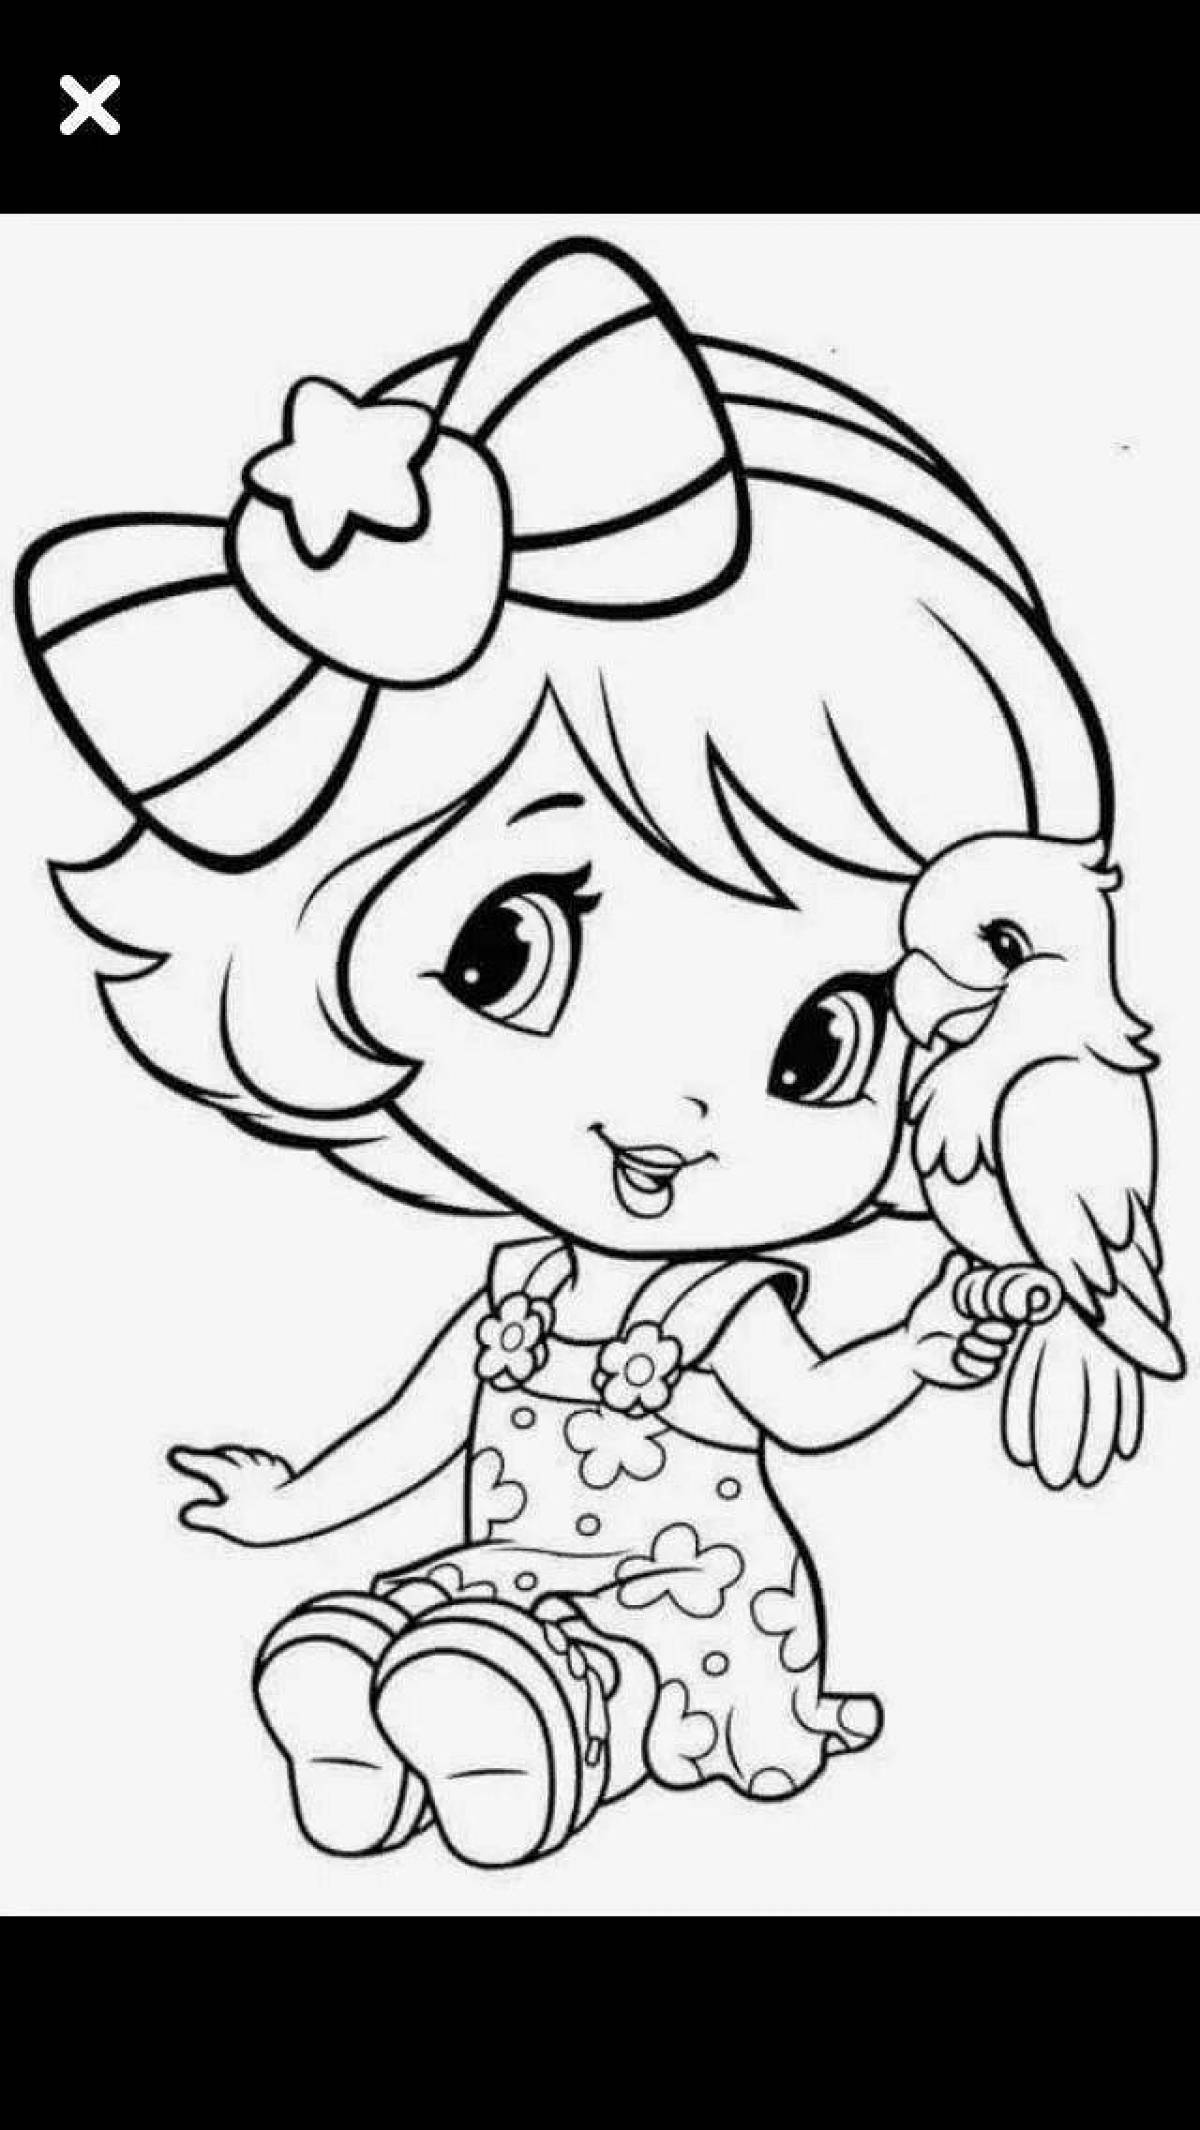 Coloring pages for cartoon girls